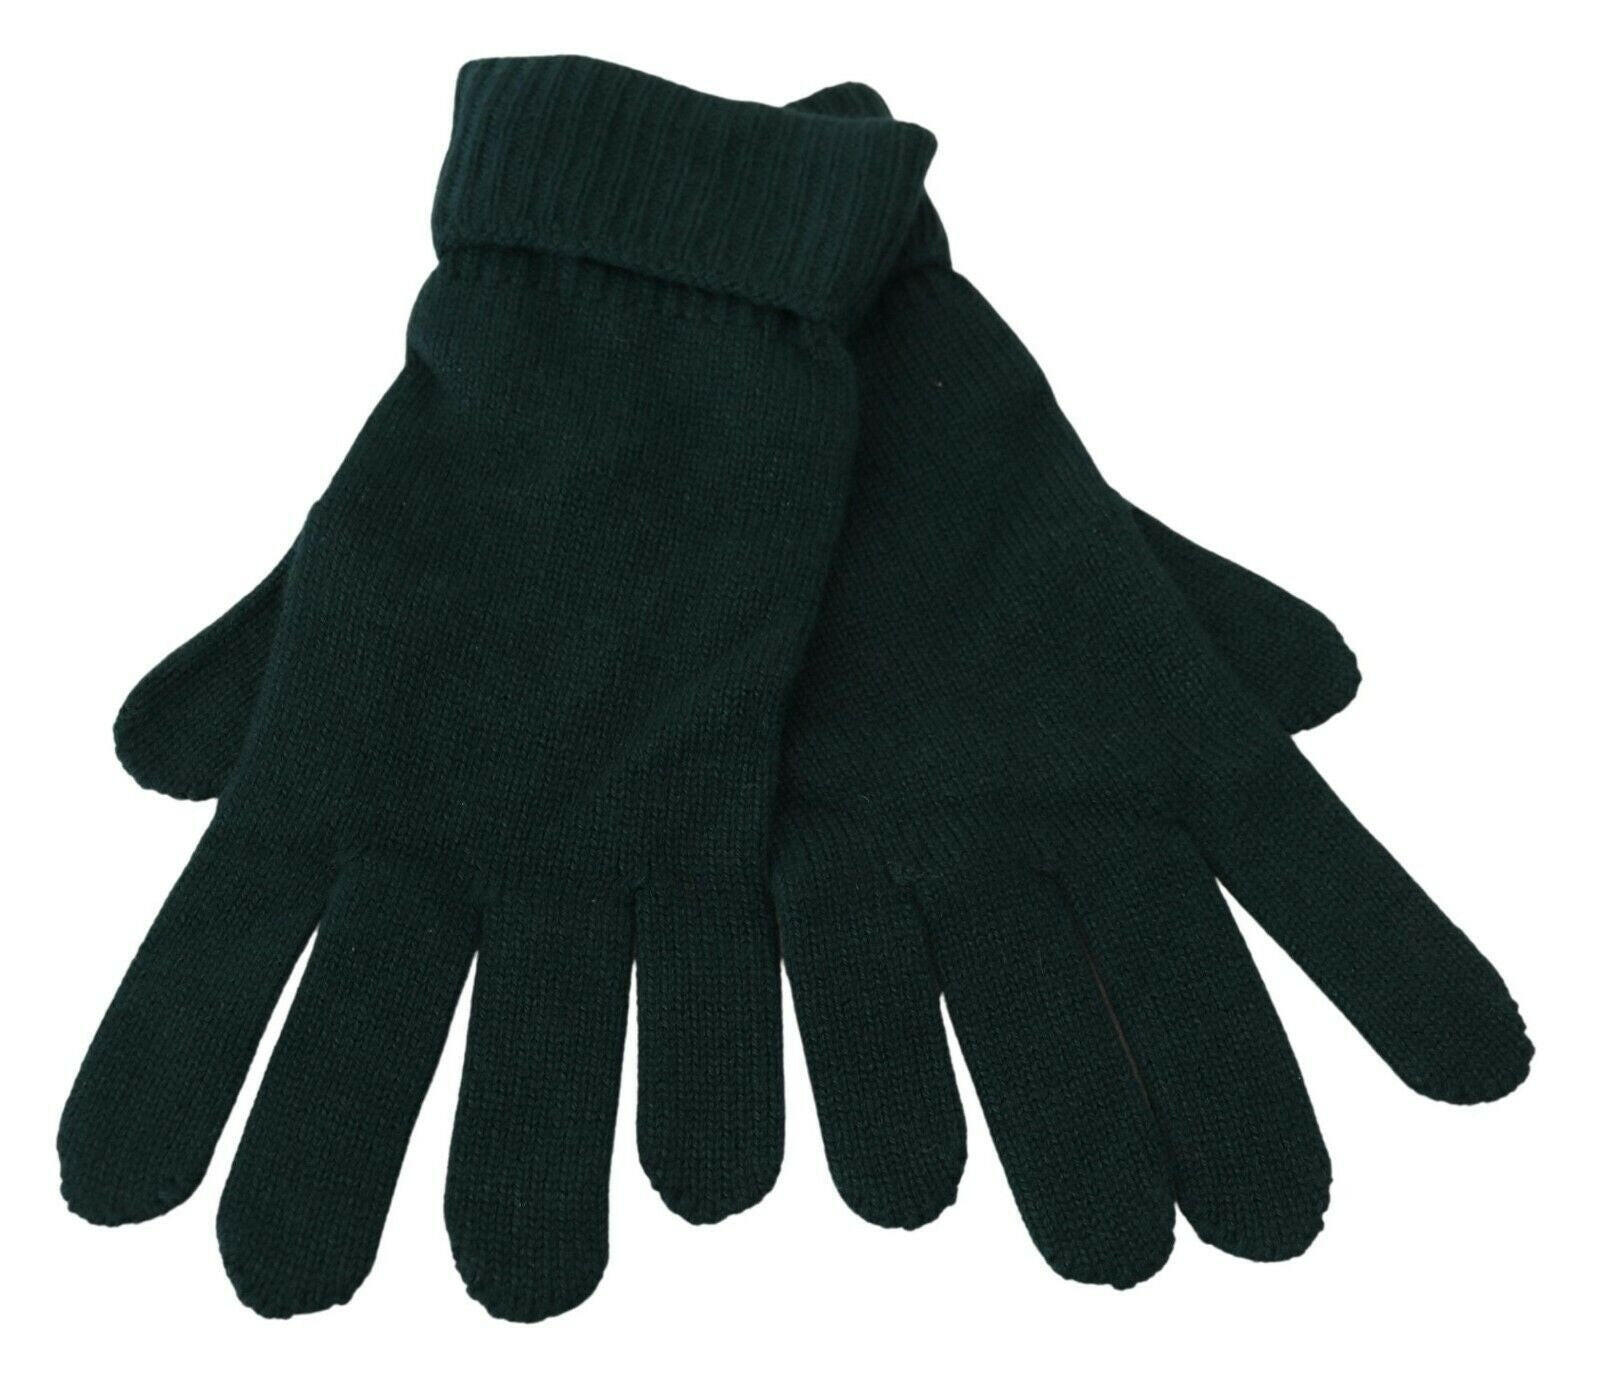 Dolce & Gabbana Green Wrist Length Cashmere Knitted Gloves - GENUINE AUTHENTIC BRAND LLC  